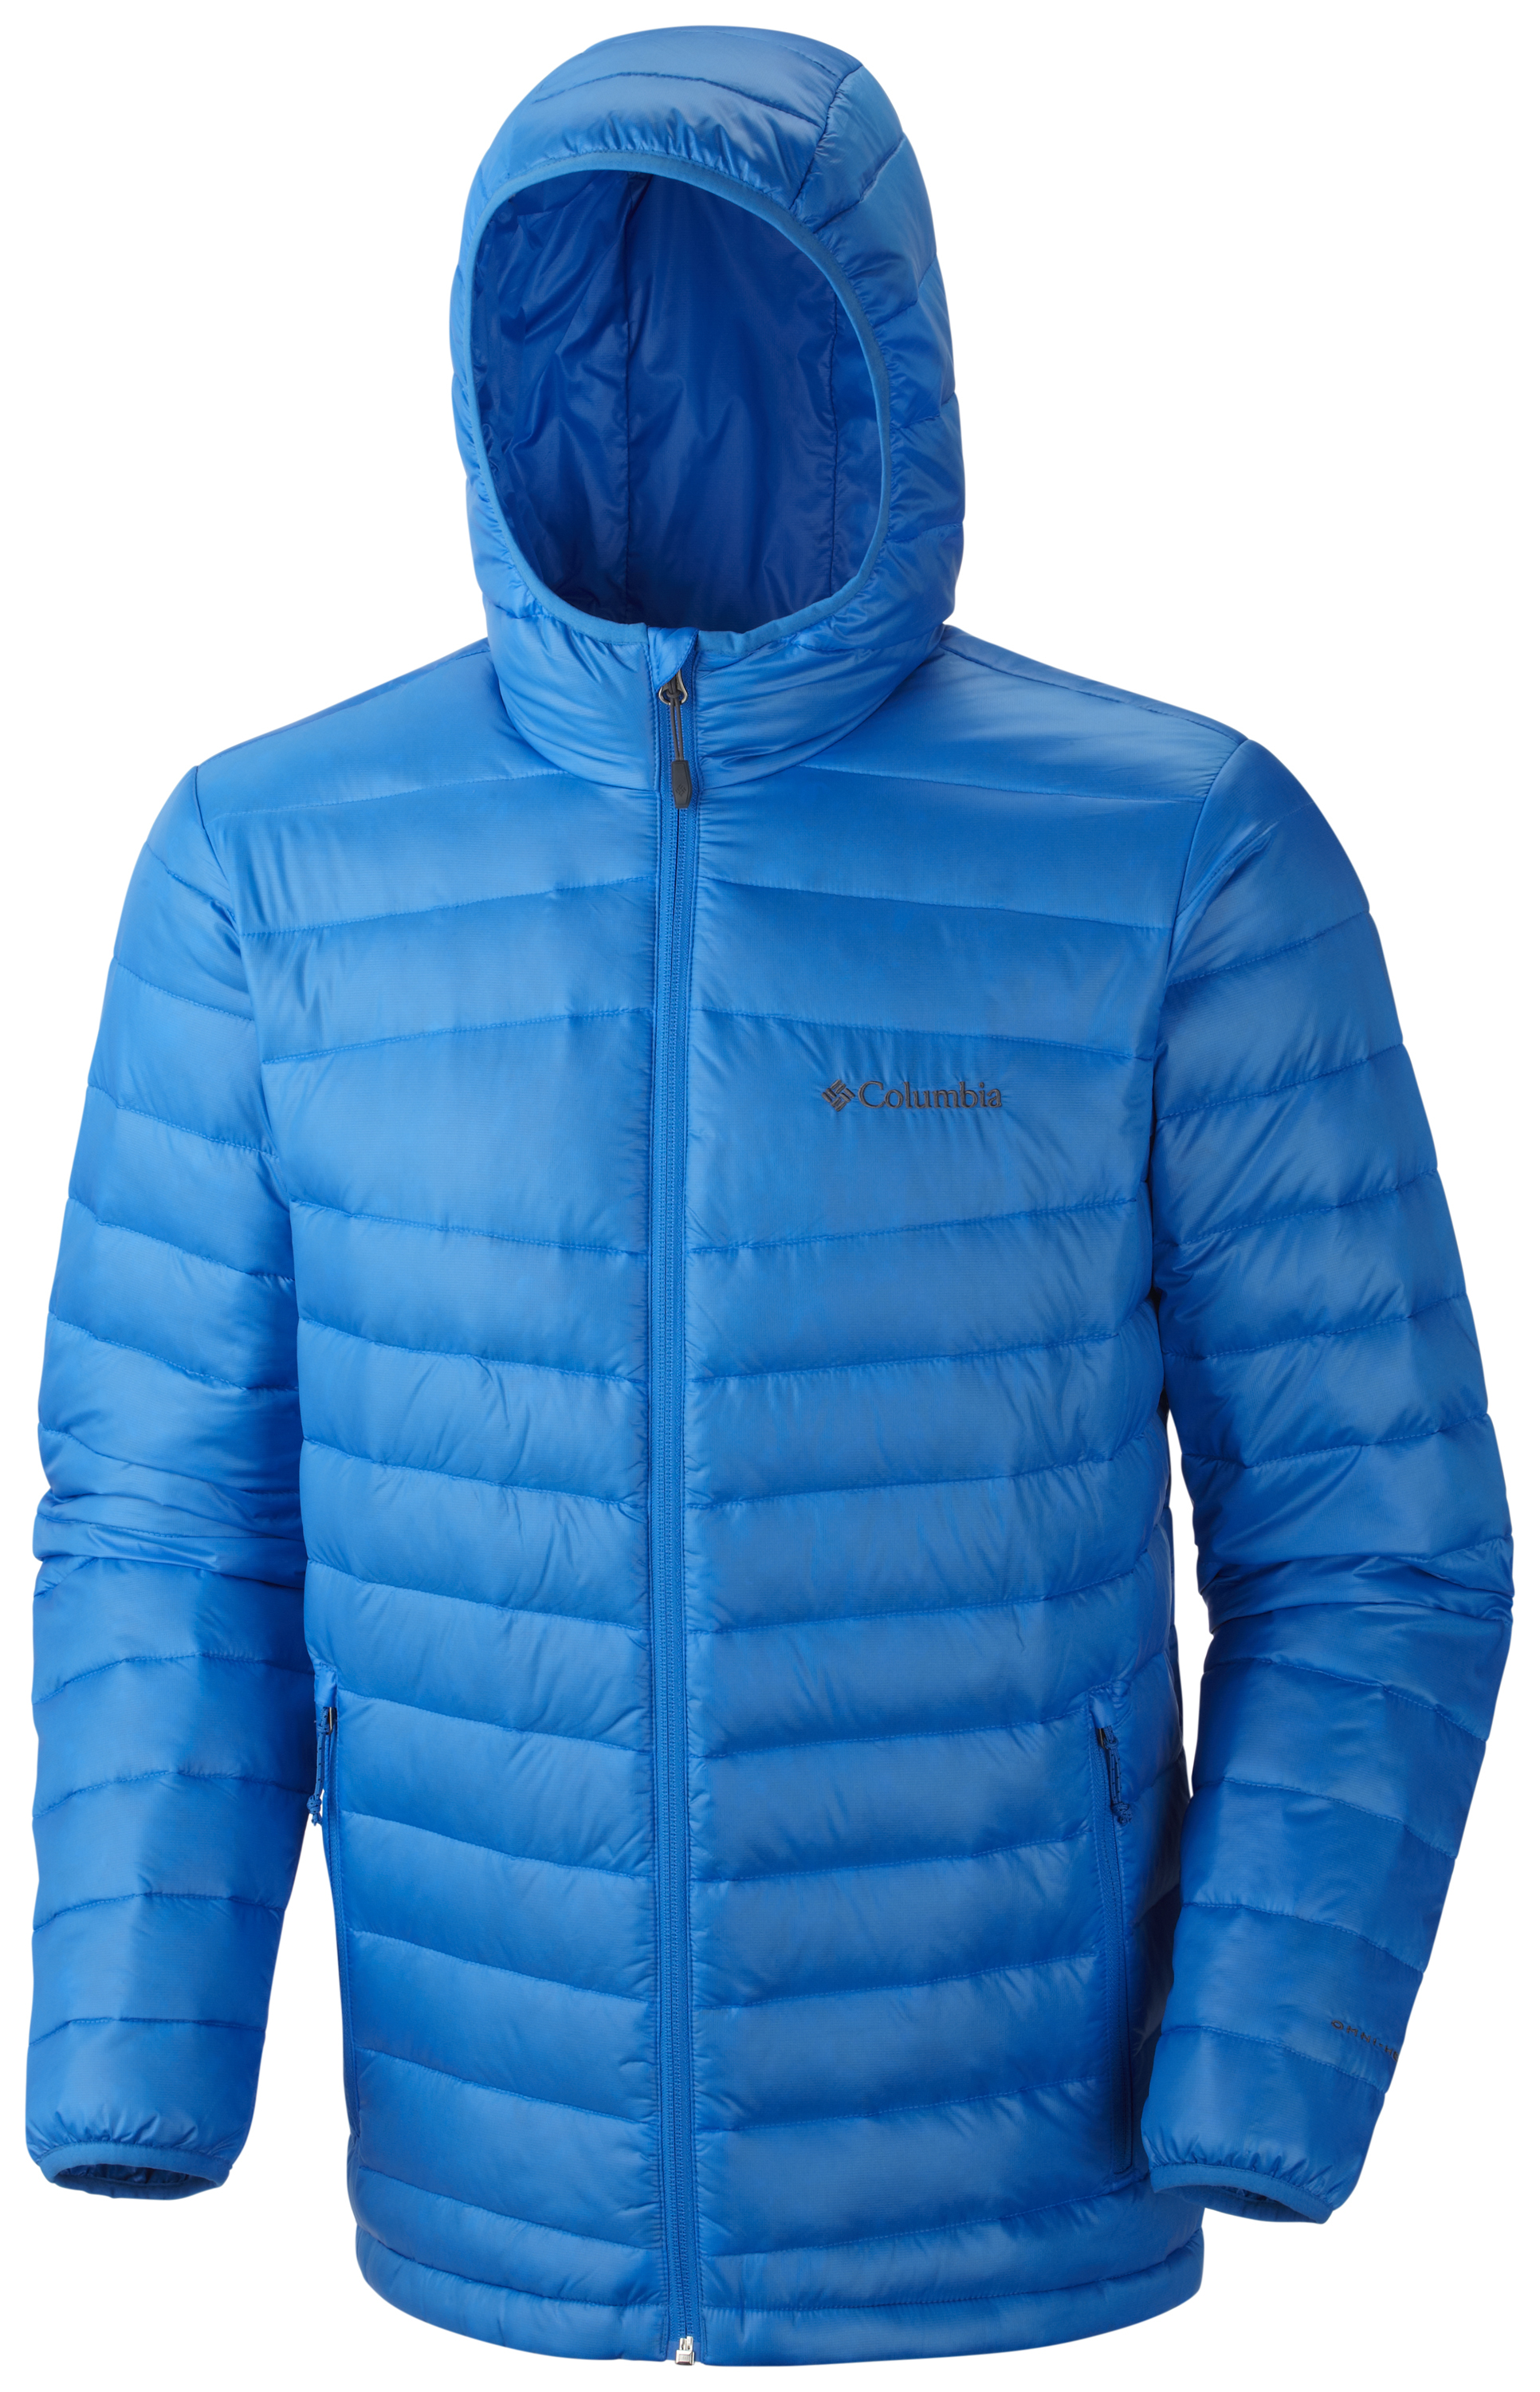 Columbia Sportswear Encourages PED Use | Business